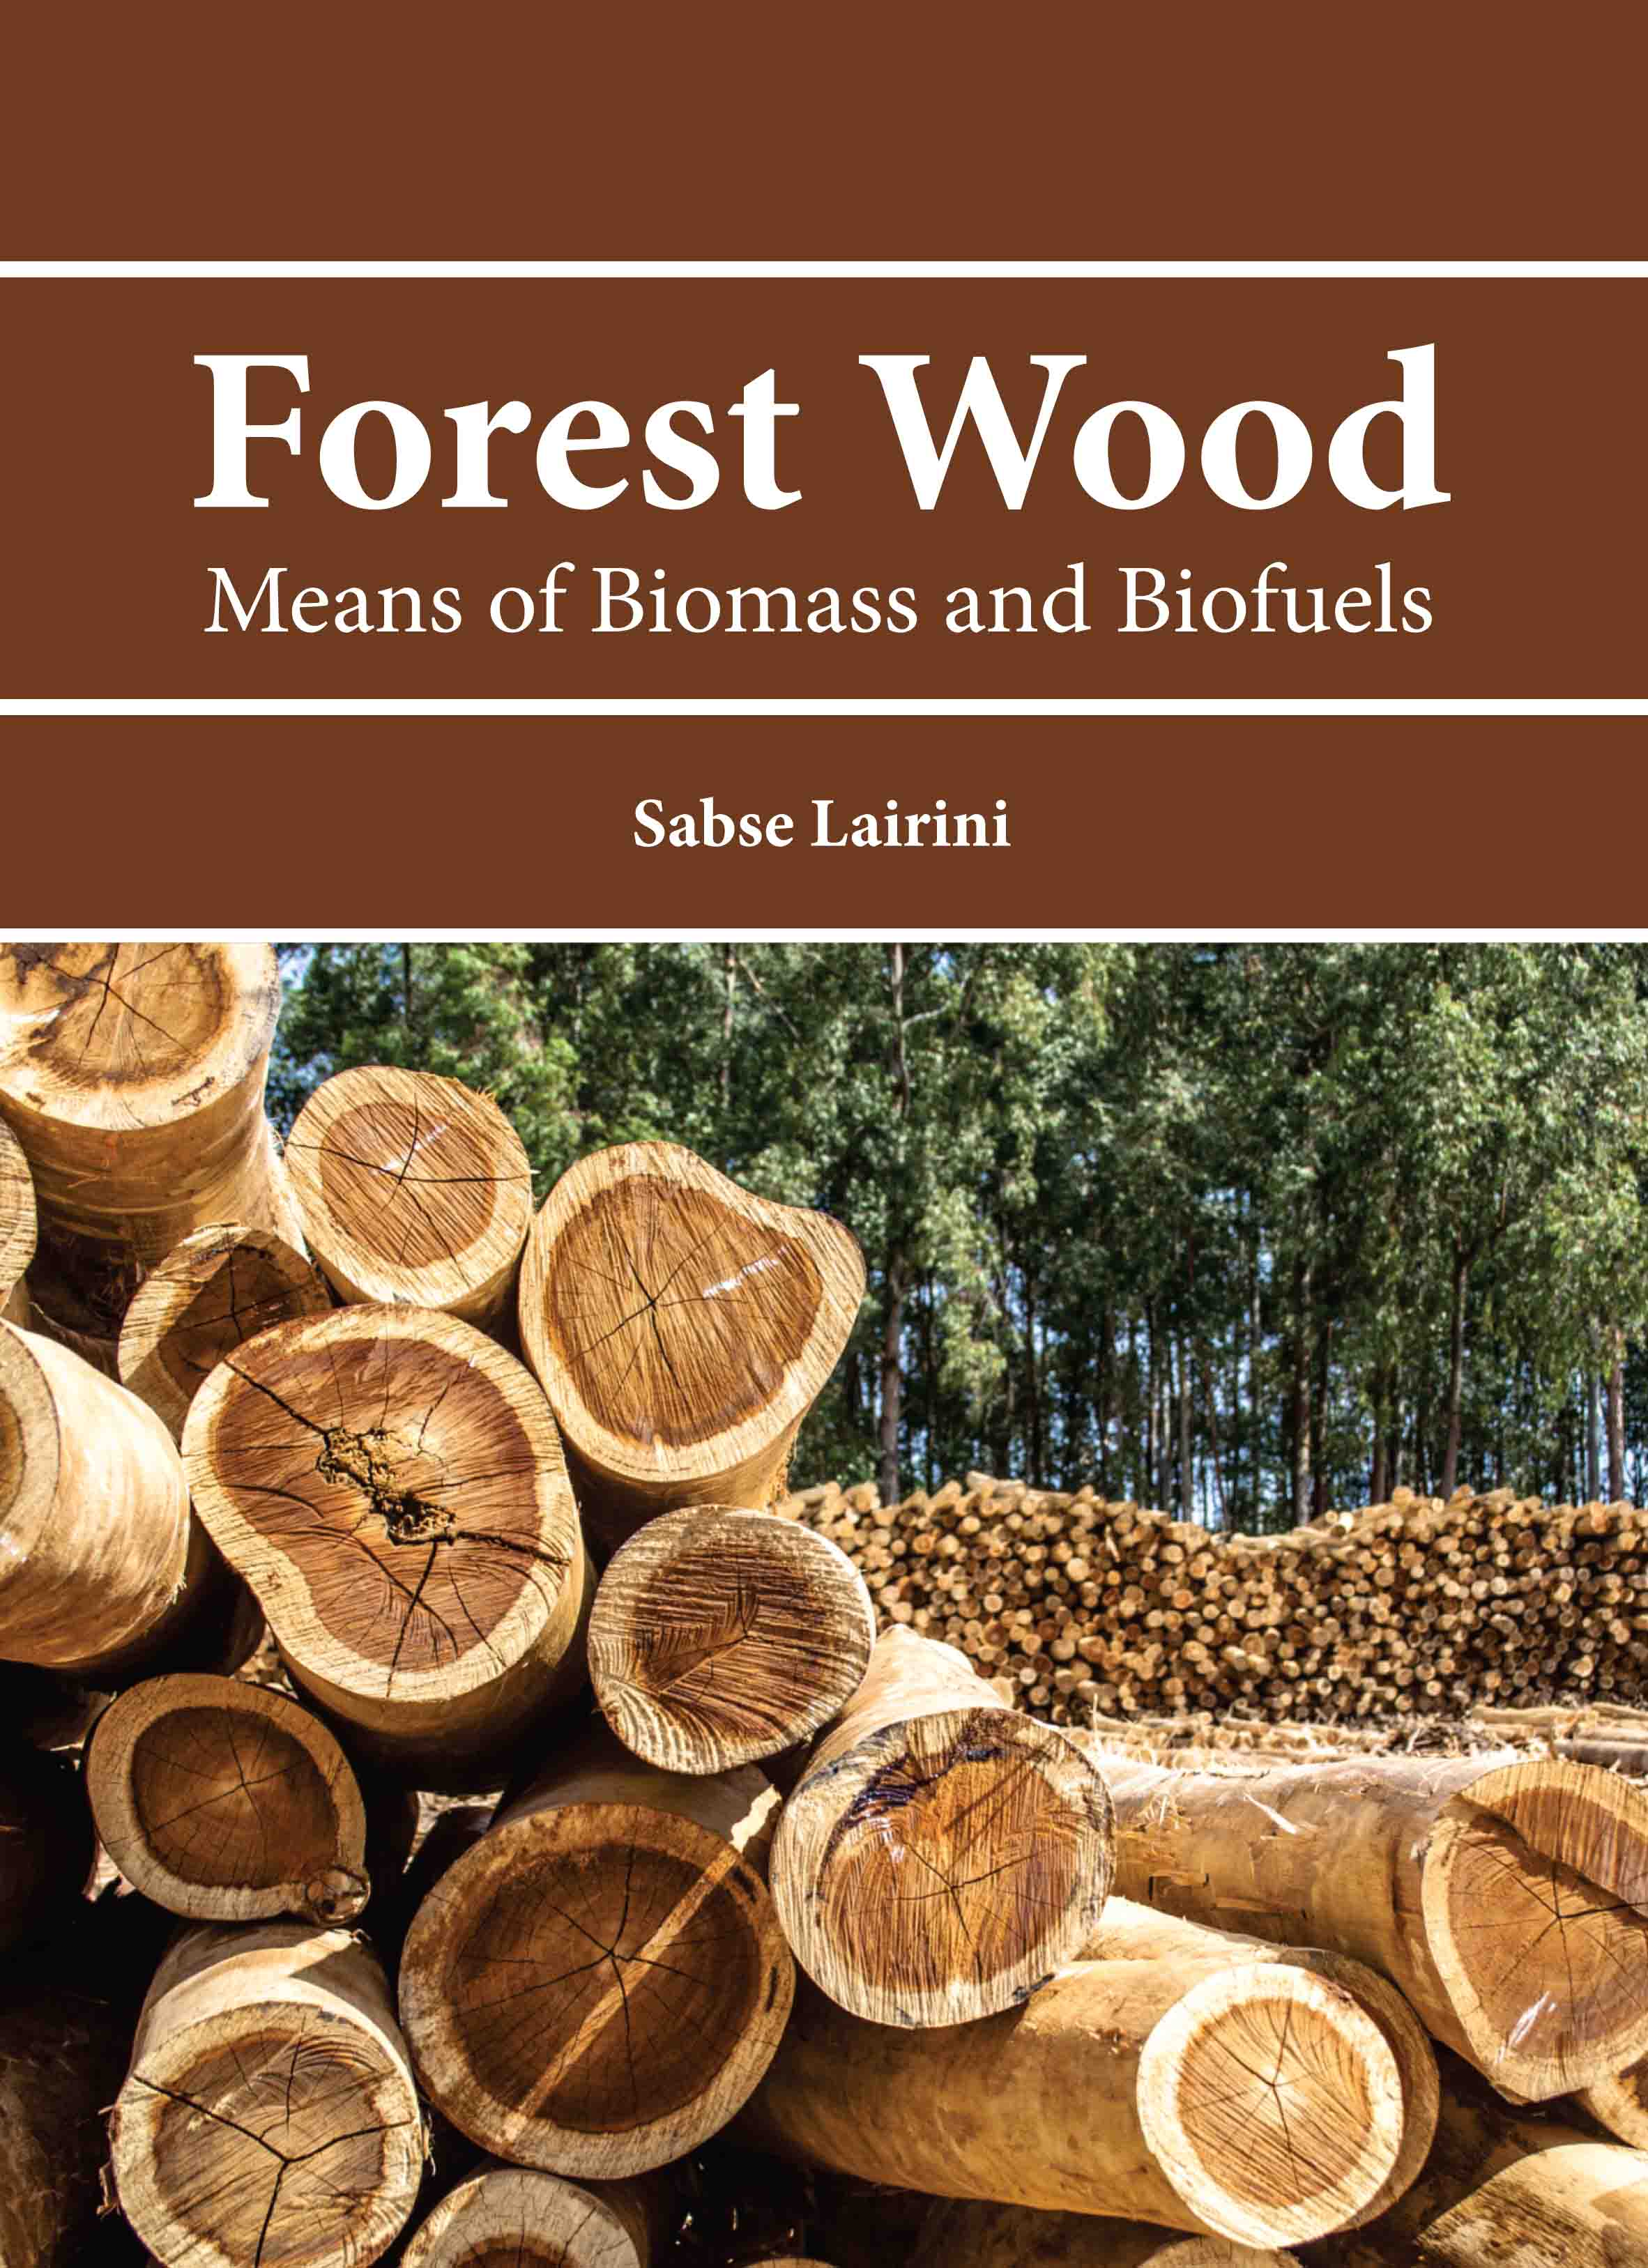 Forest Wood: Means of Biomass and Biofuels